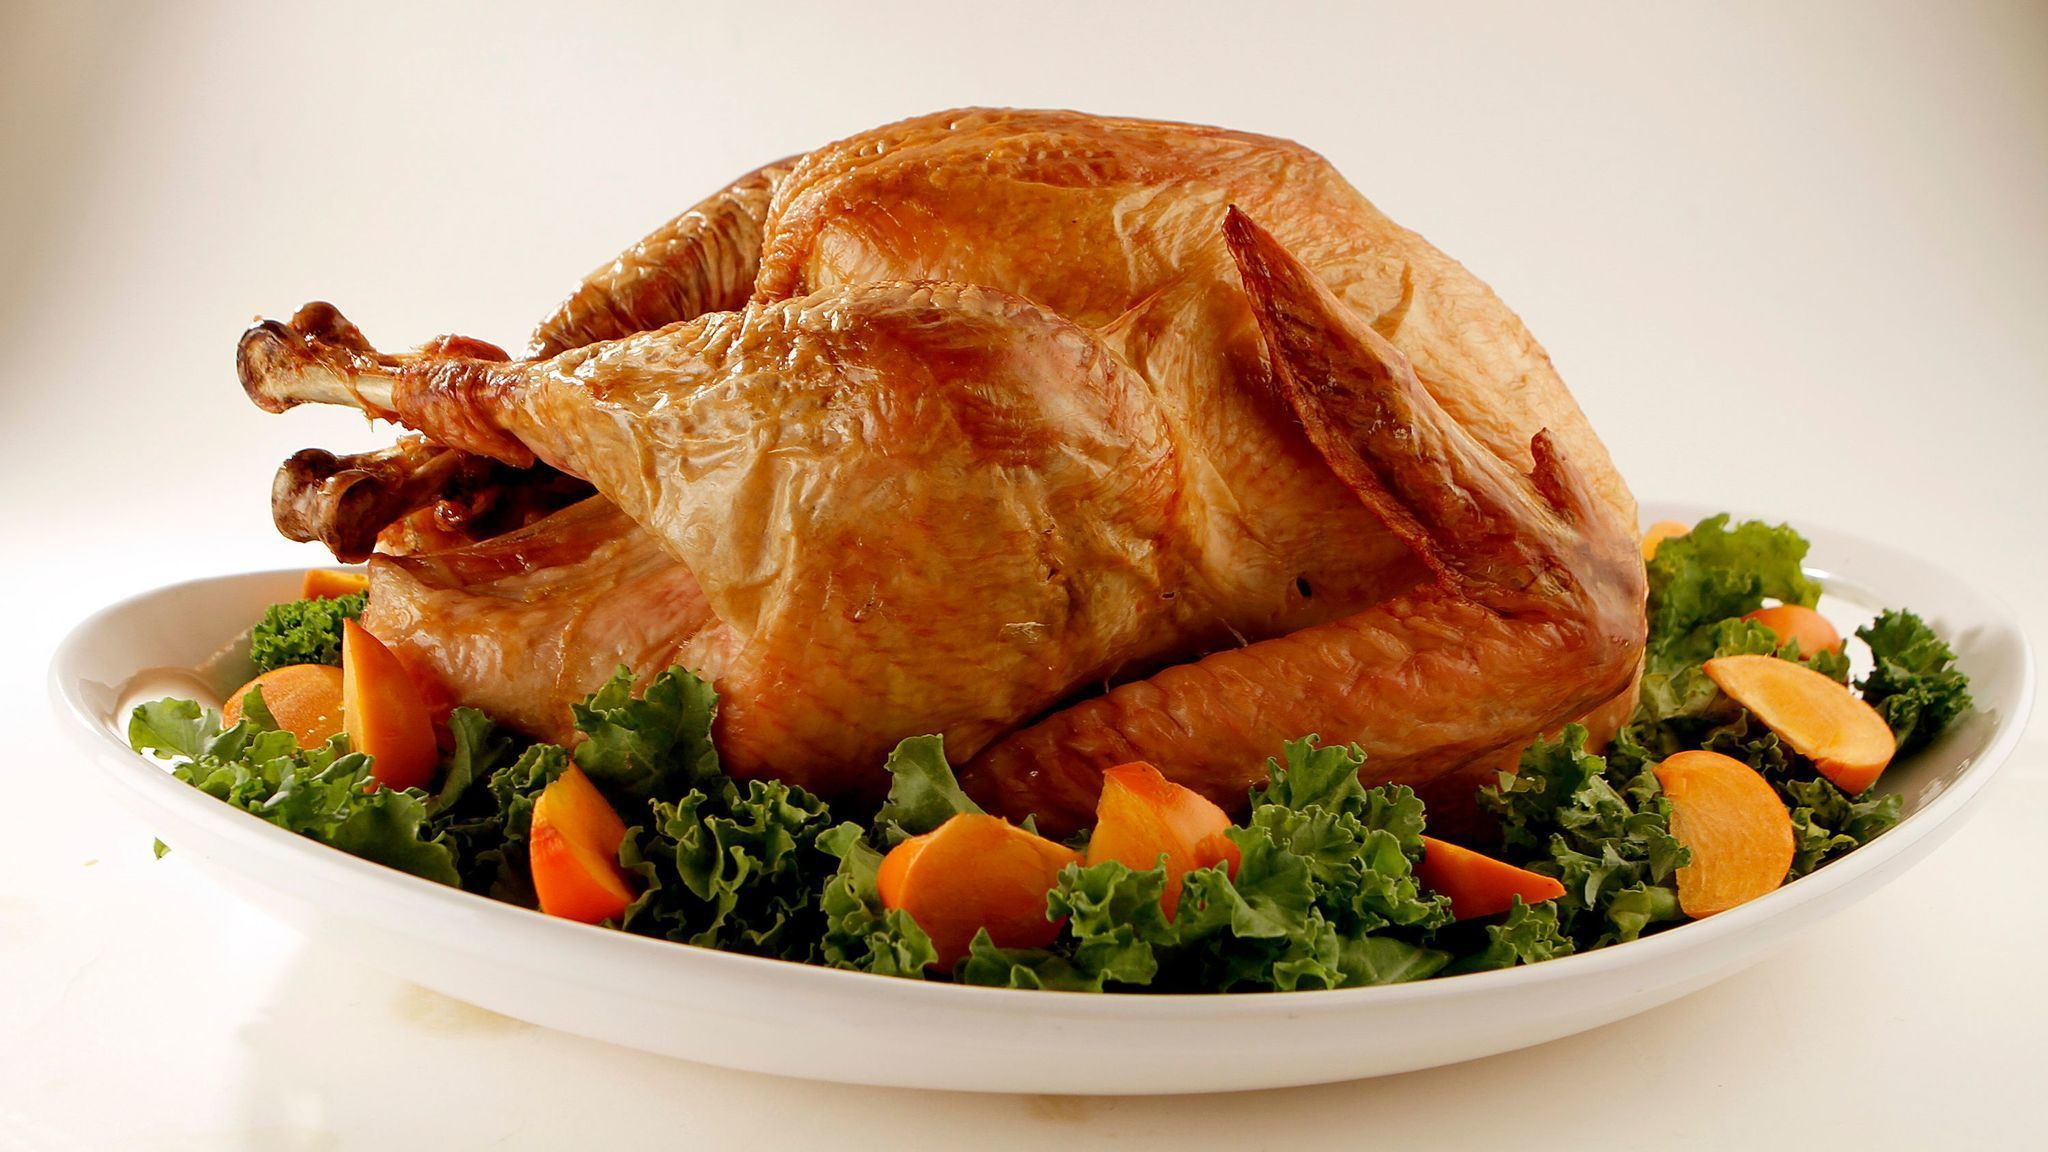 Picture Of Thanksgiving Turkey
 A beginner s guide to cooking a Thanksgiving turkey LA Times